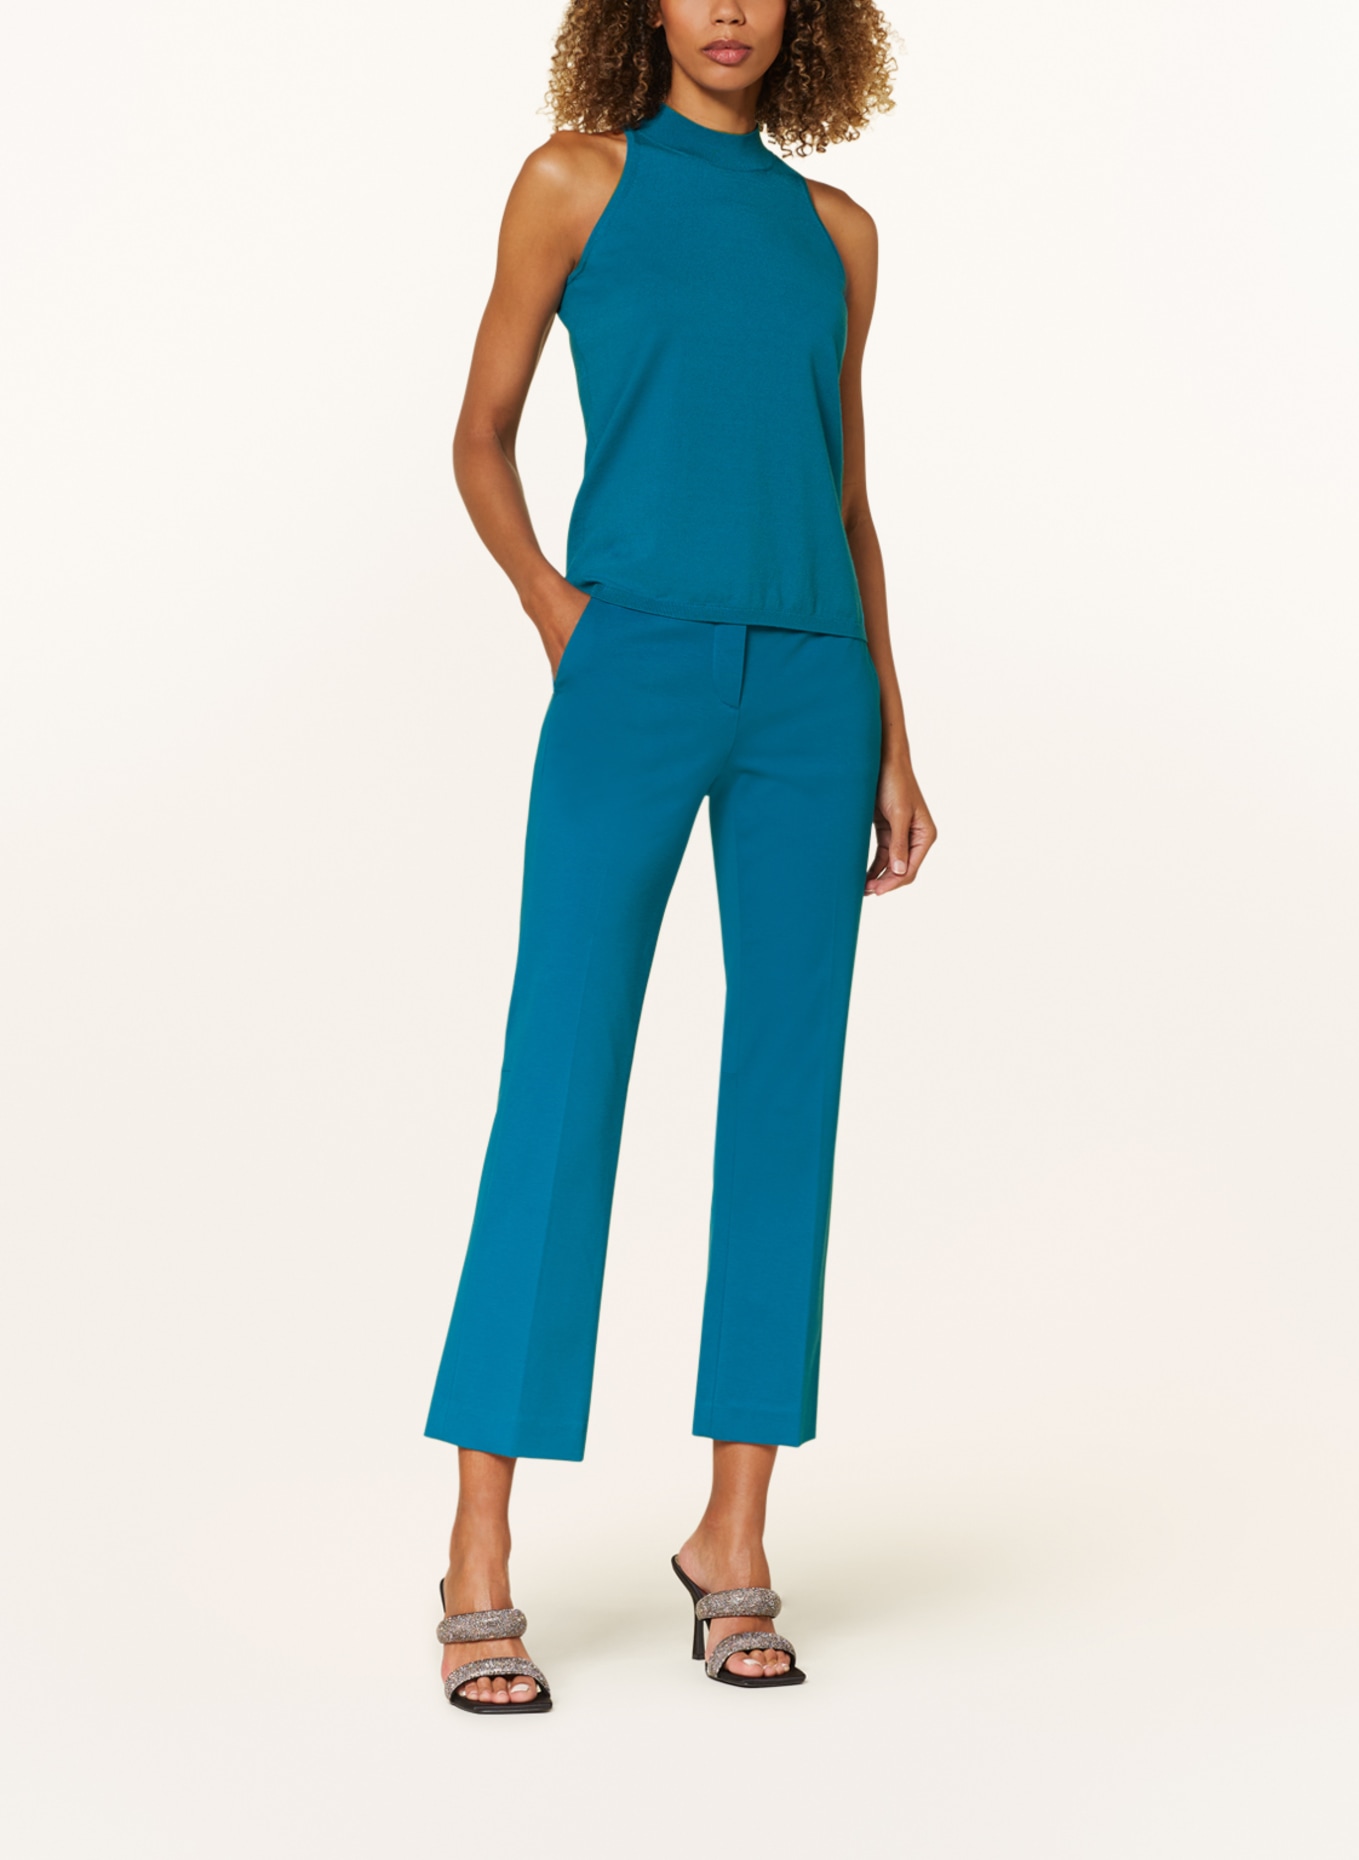 LUISA CERANO Knit top, Color: TURQUOISE (Image 2)